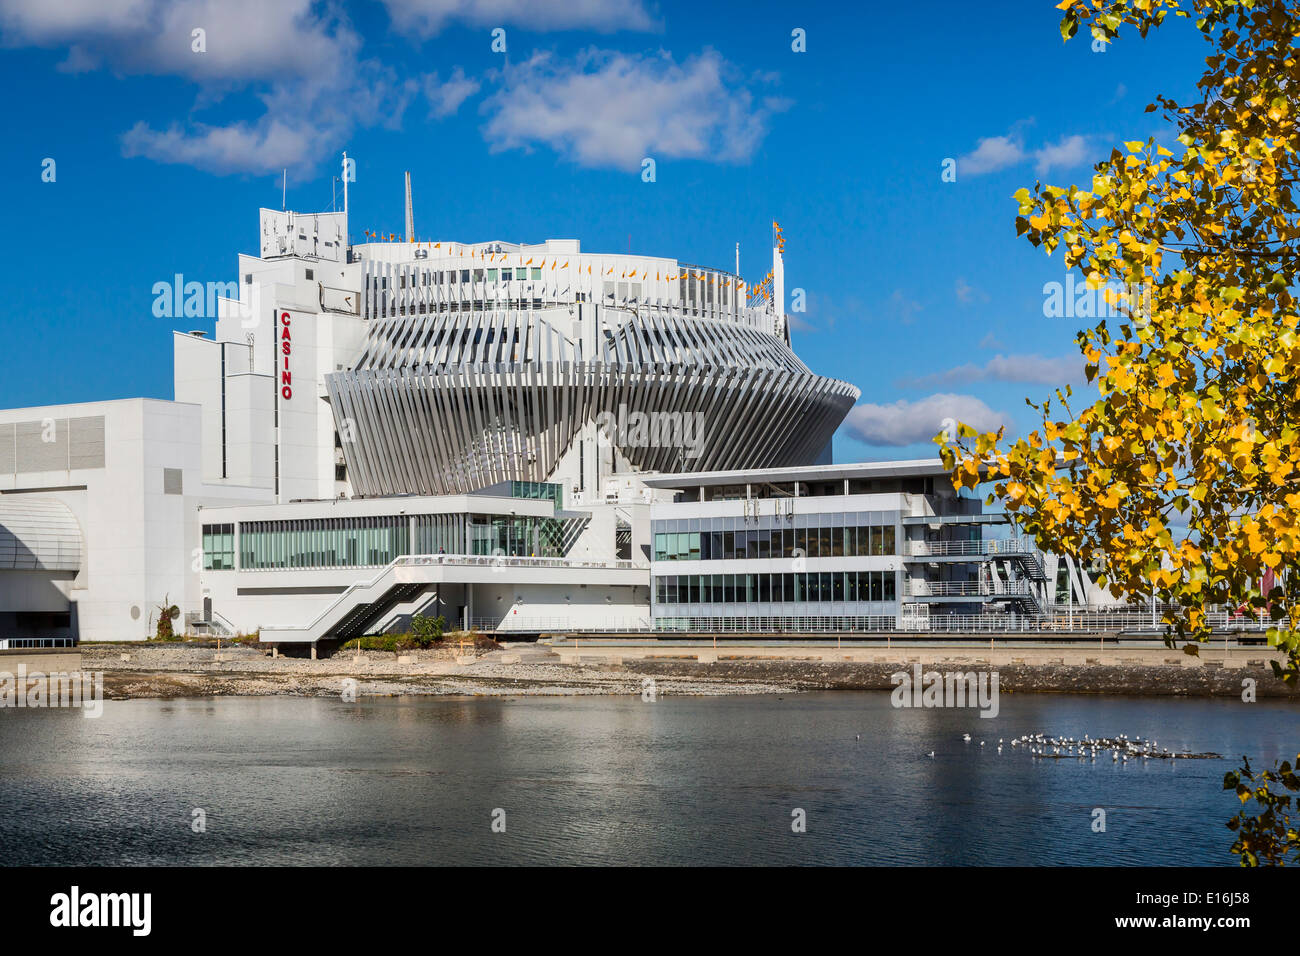 The Montreal Casino on Ils Notre Dame, Montreal, Quebec, Canada. Stock Photo